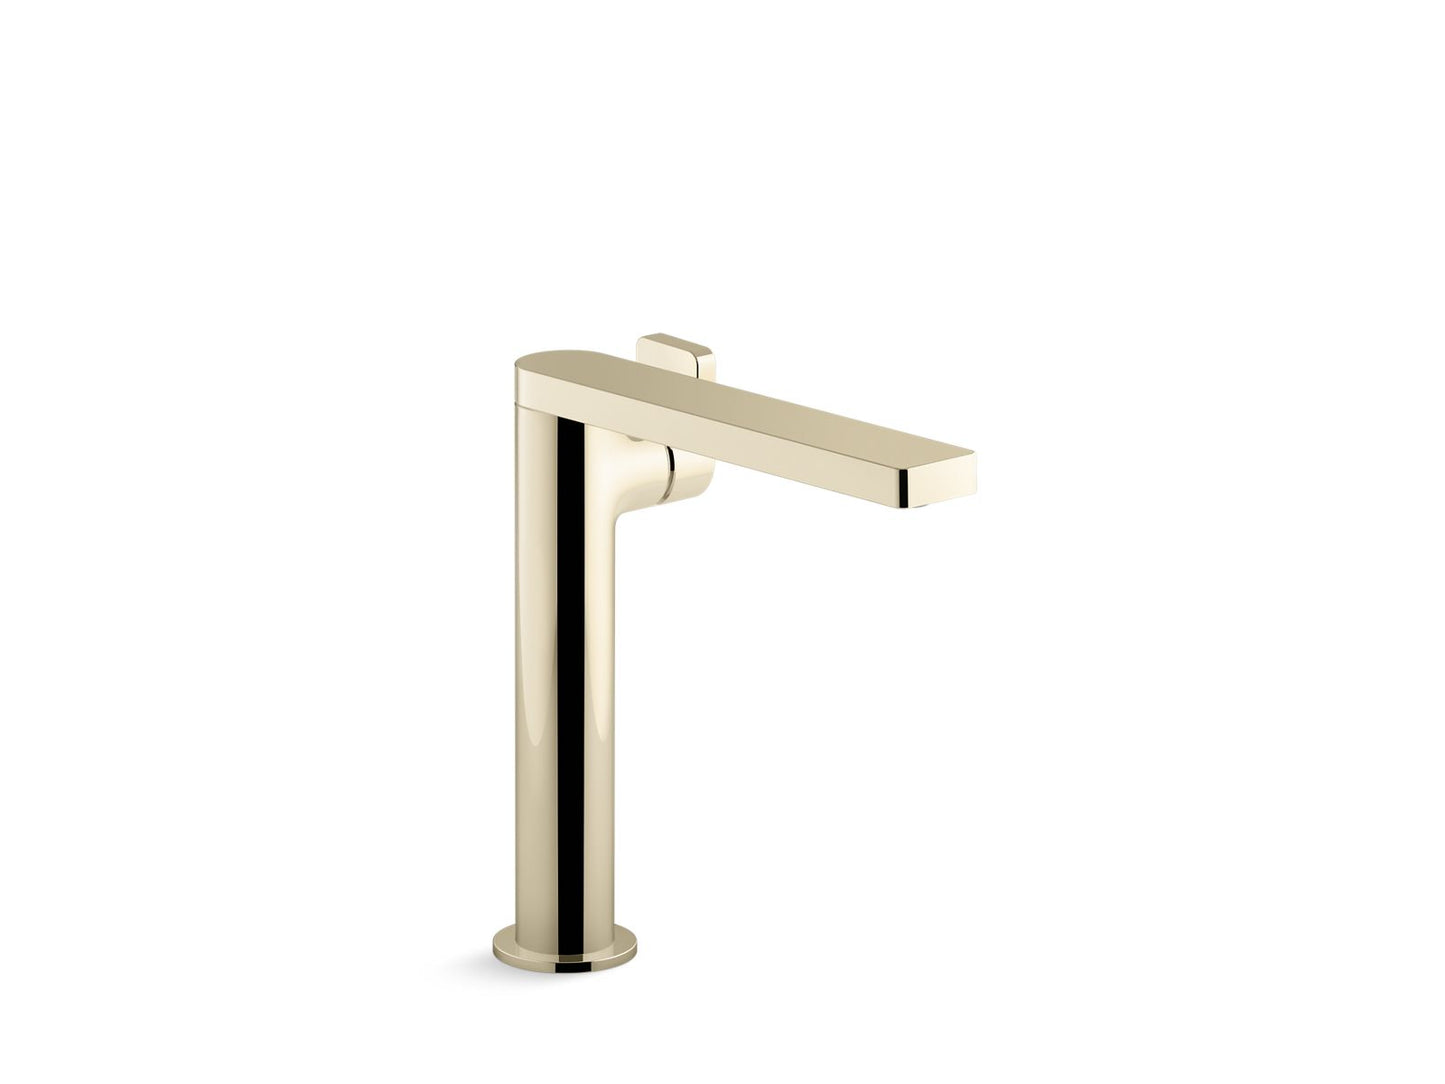 KOHLER K-73168-4-AF Composed Tall Single-Handle Bathroom Sink Faucet With Lever Handle, 1.2 Gpm In Vibrant French Gold